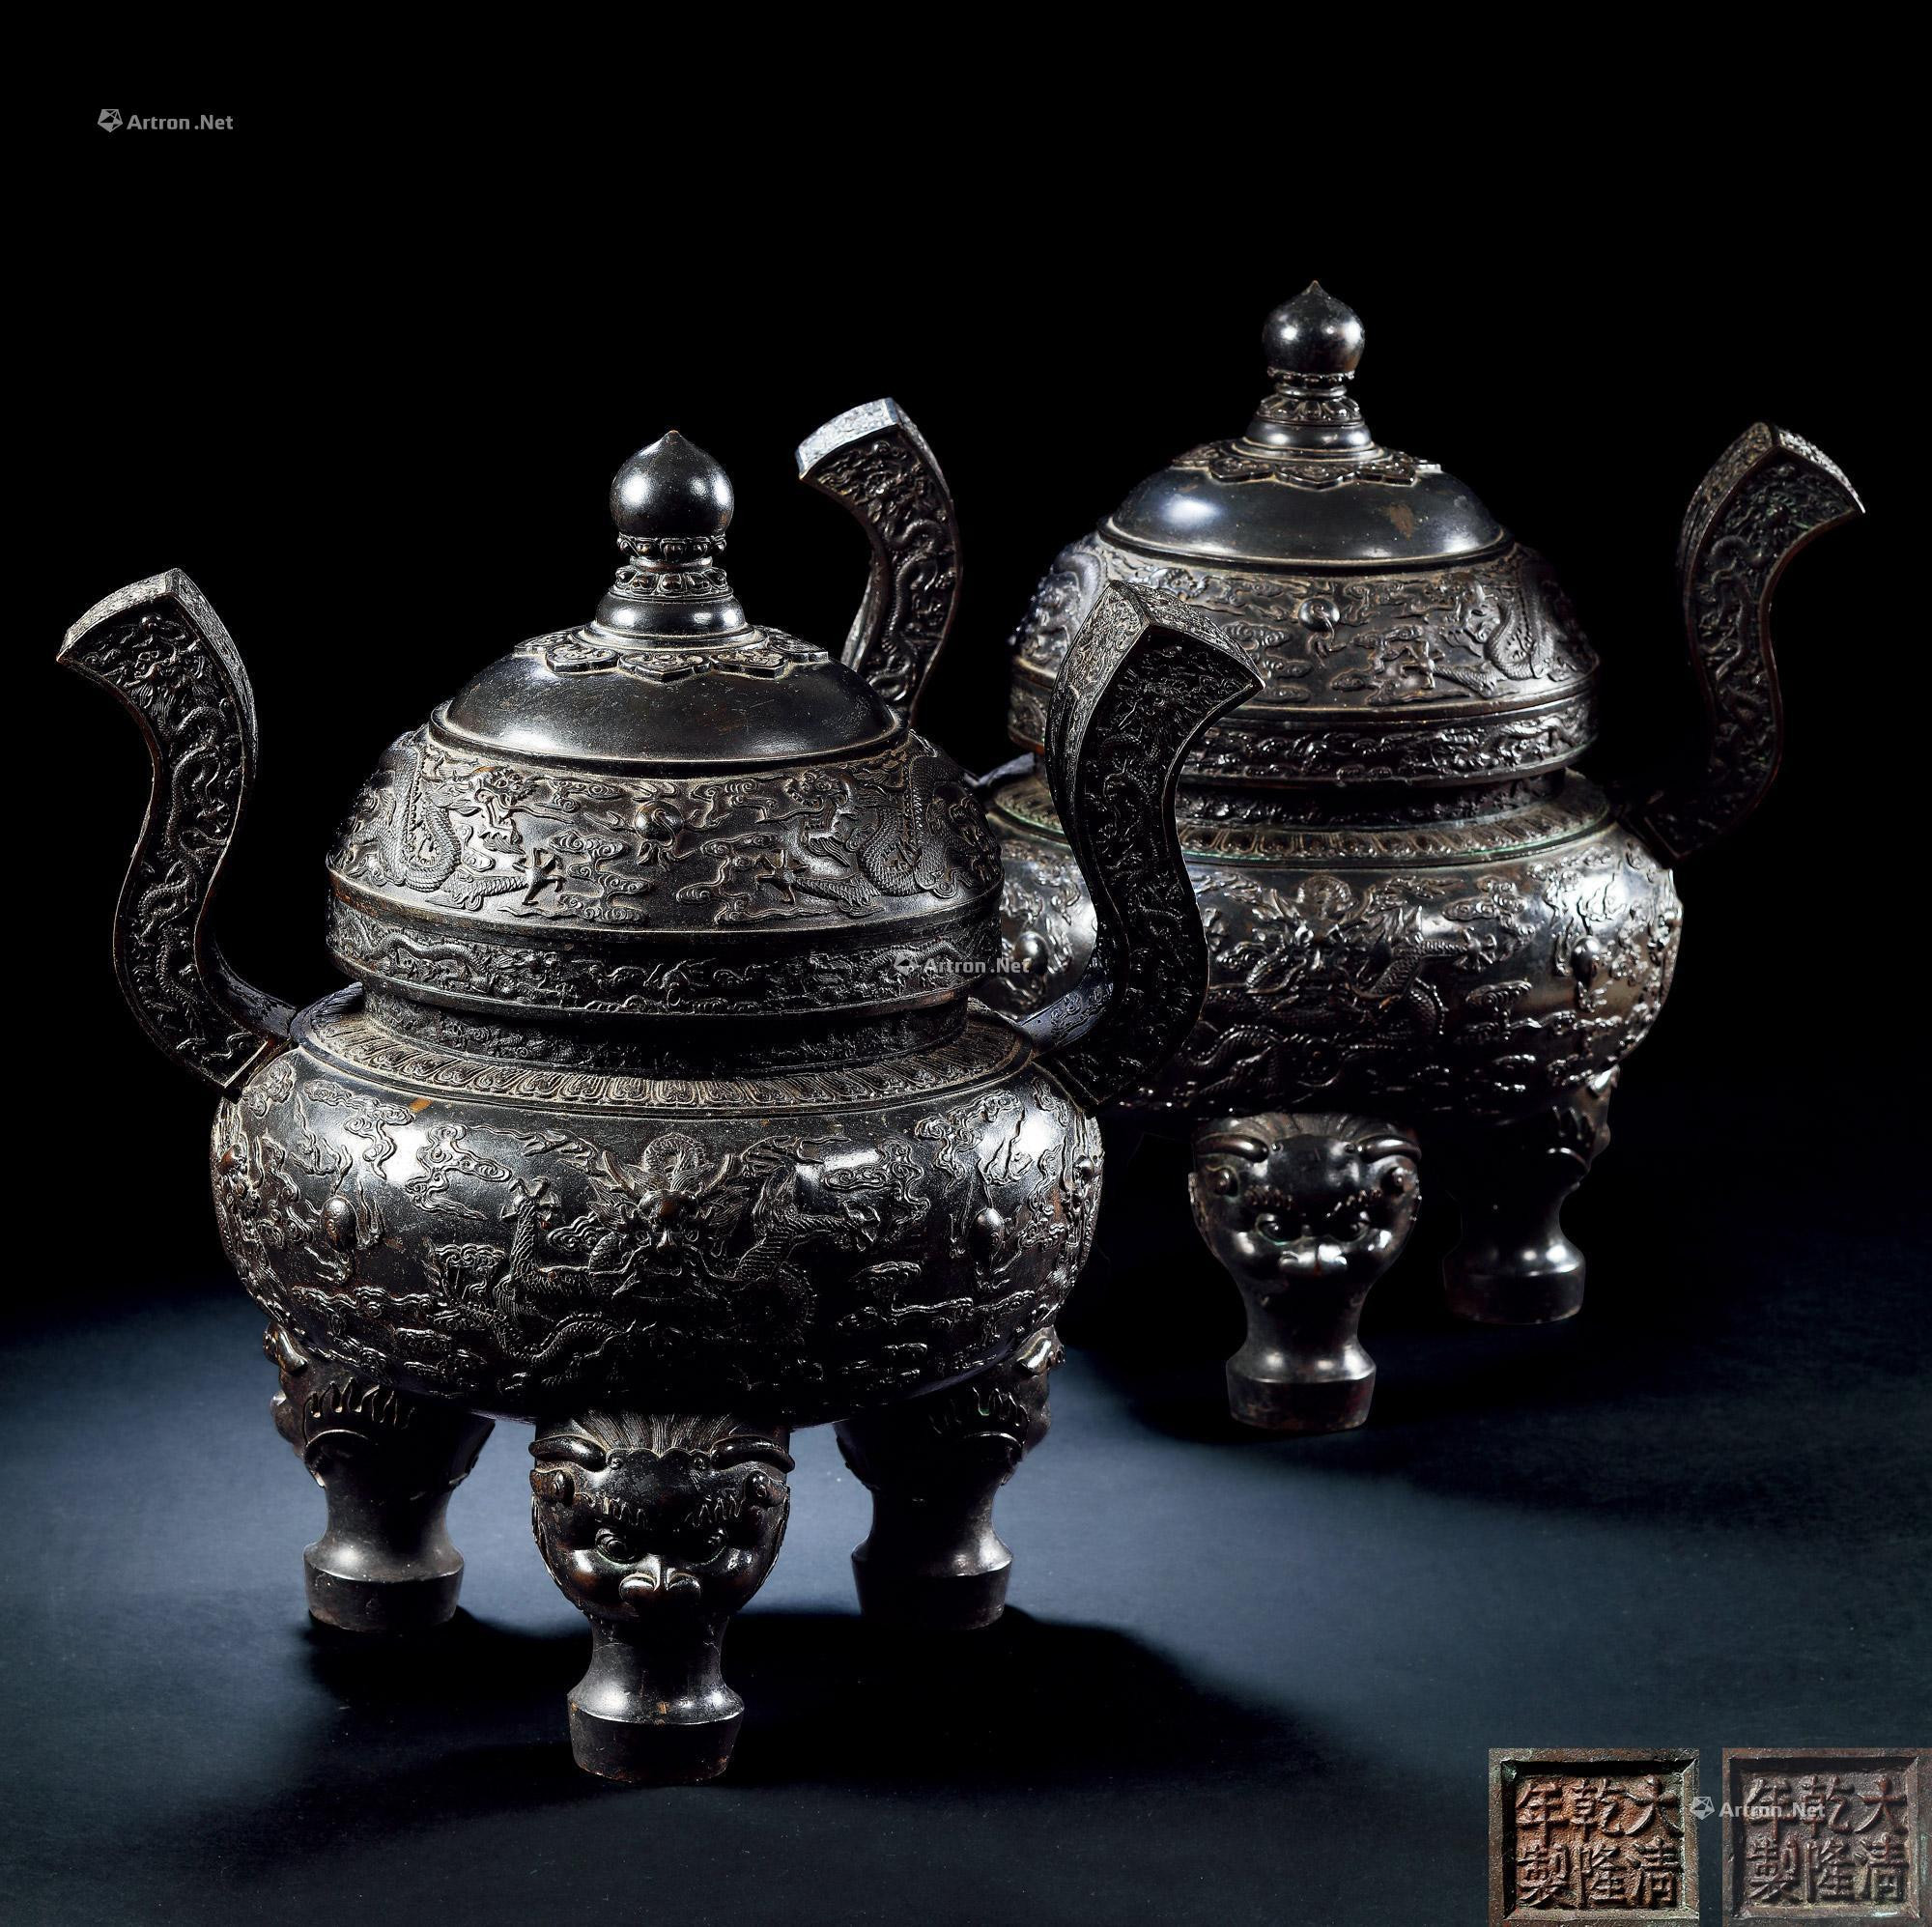 A PAIR OF LARGE AND RARE BRONZE‘DRAGON’ CENSERS WITH HANDLES